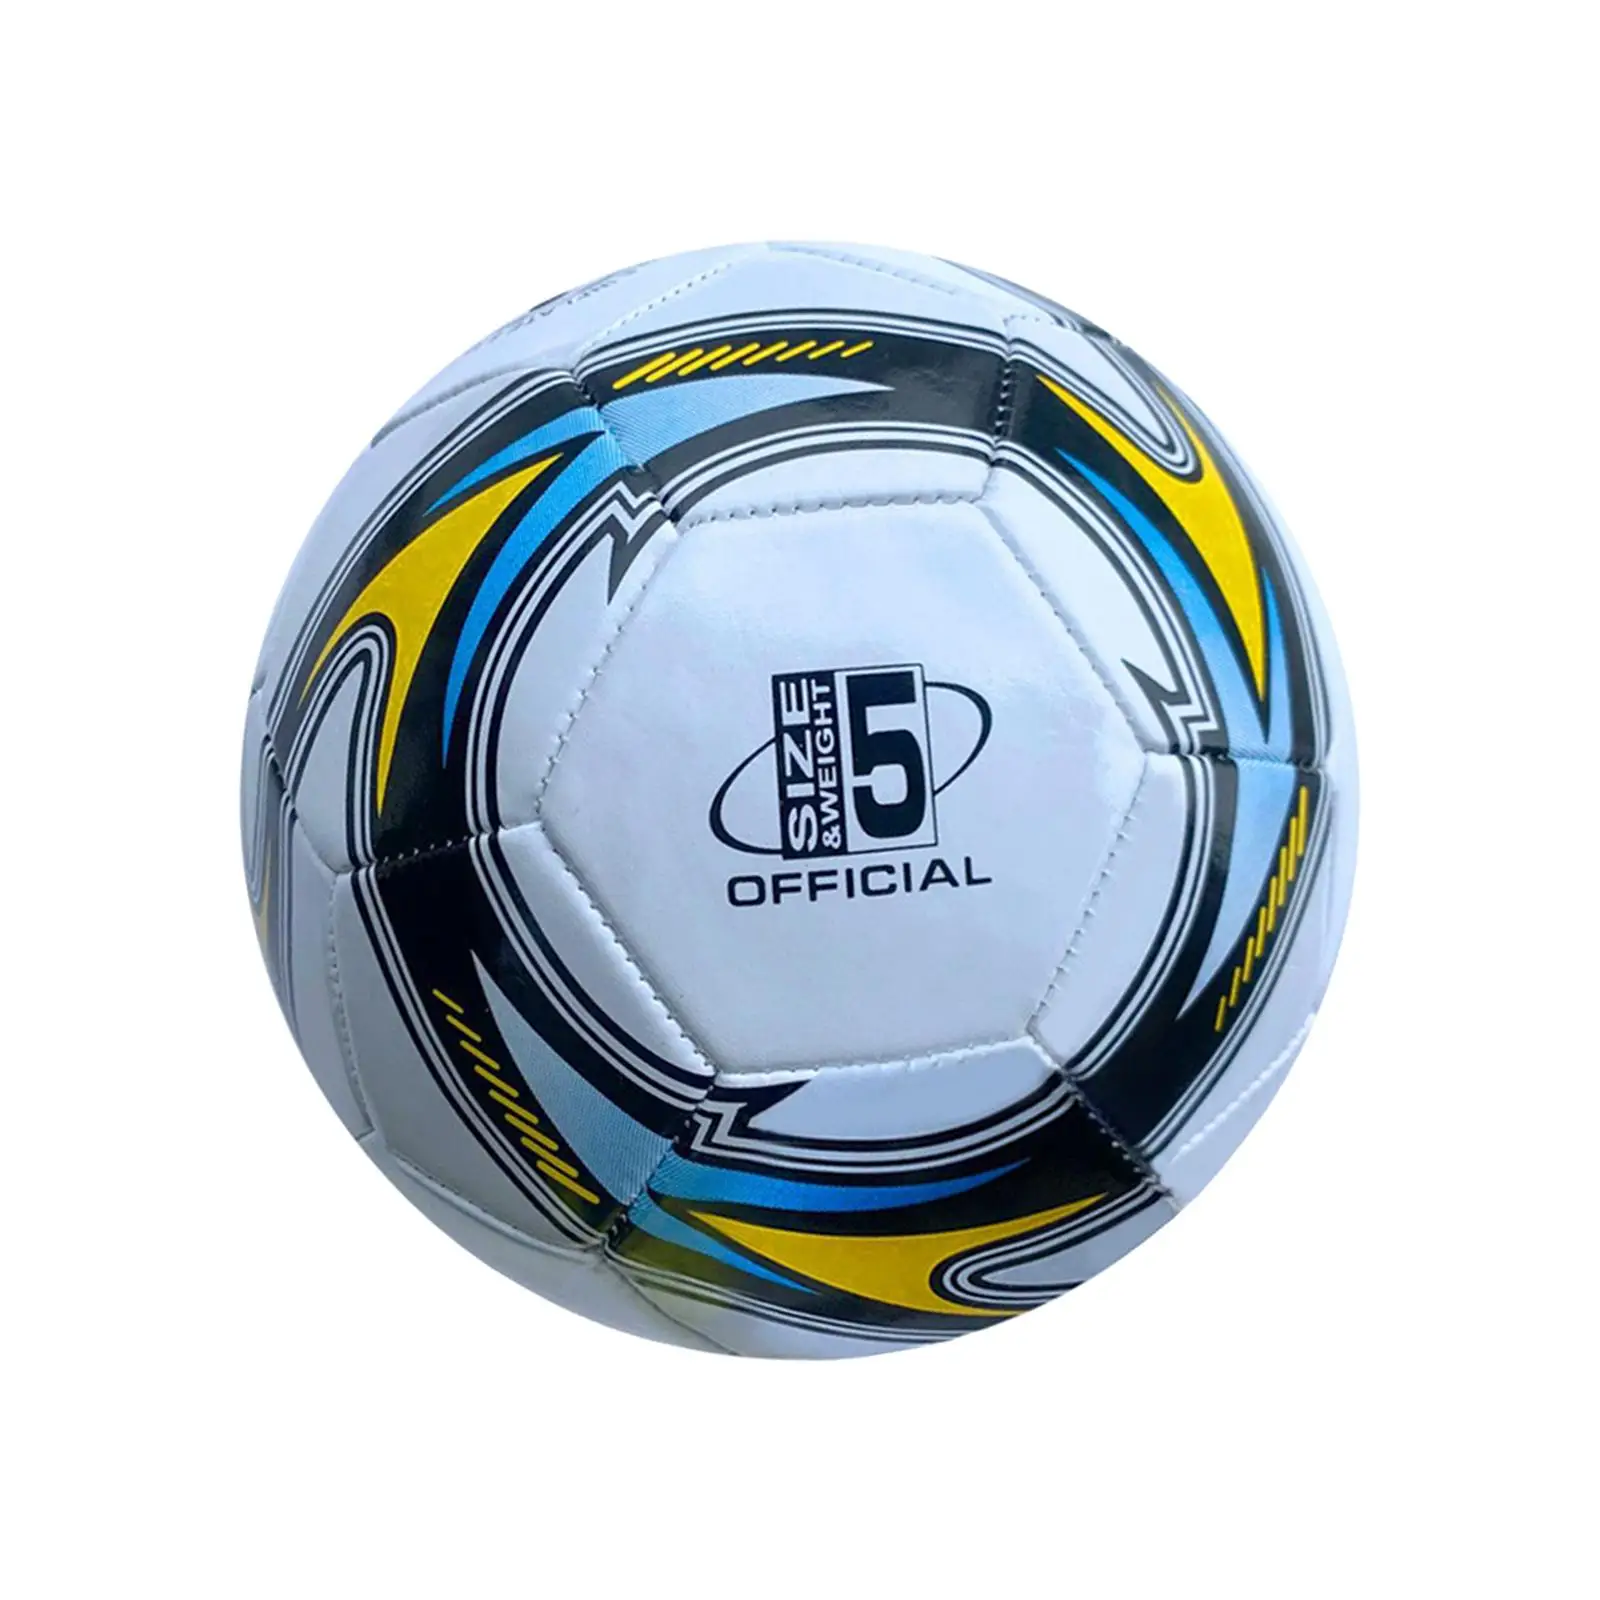 Soccer Ball Wear Resistant Football for Professionals Adults Beginners